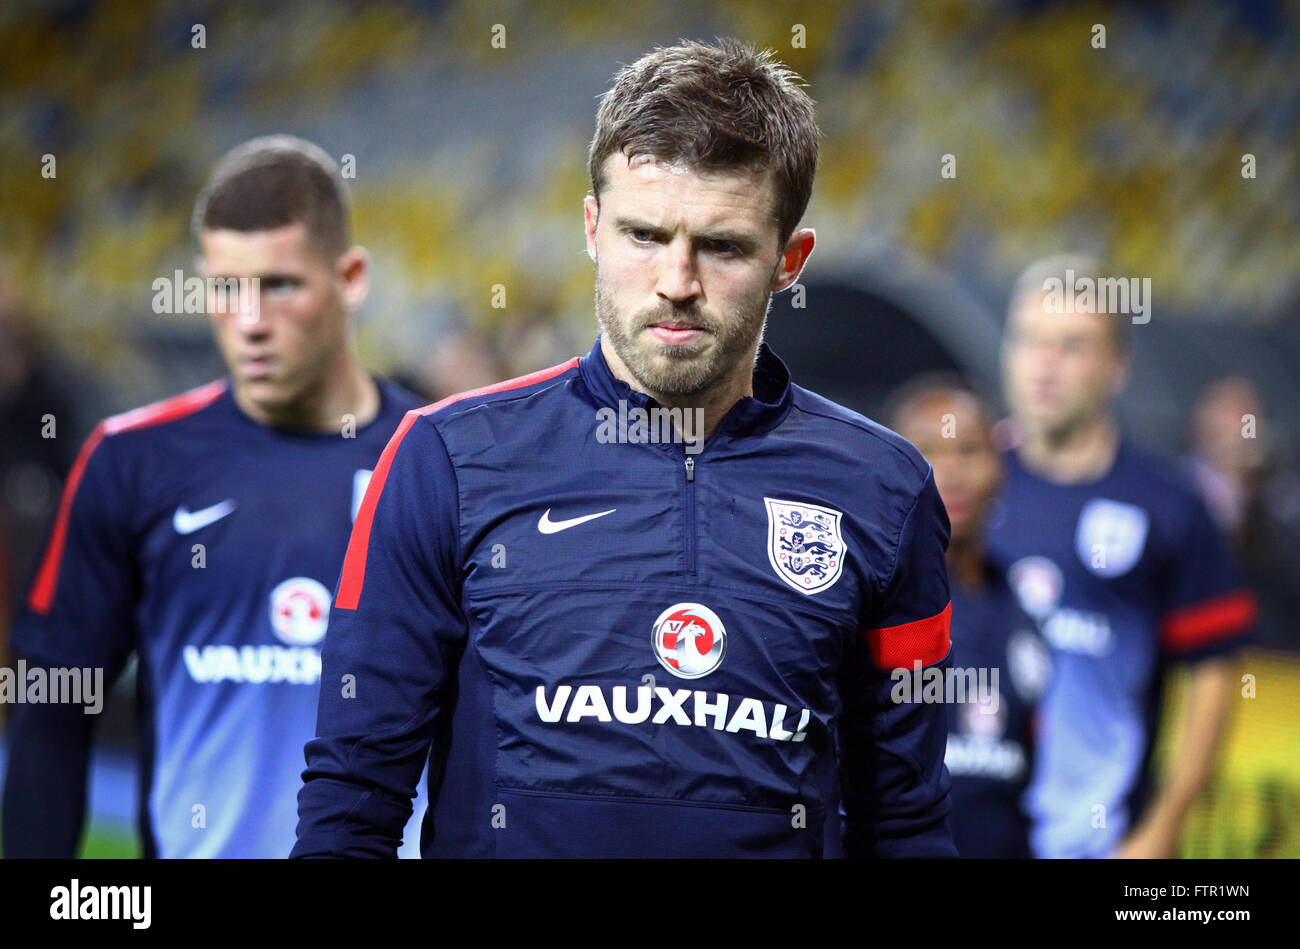 KYIV, UKRAINE - SEPTEMBER 9, 2013: Michael Carrick of England looks on during training session at NSC Olympic stadium before FIFA World Cup 2014 qualifier game against Ukraine Stock Photo